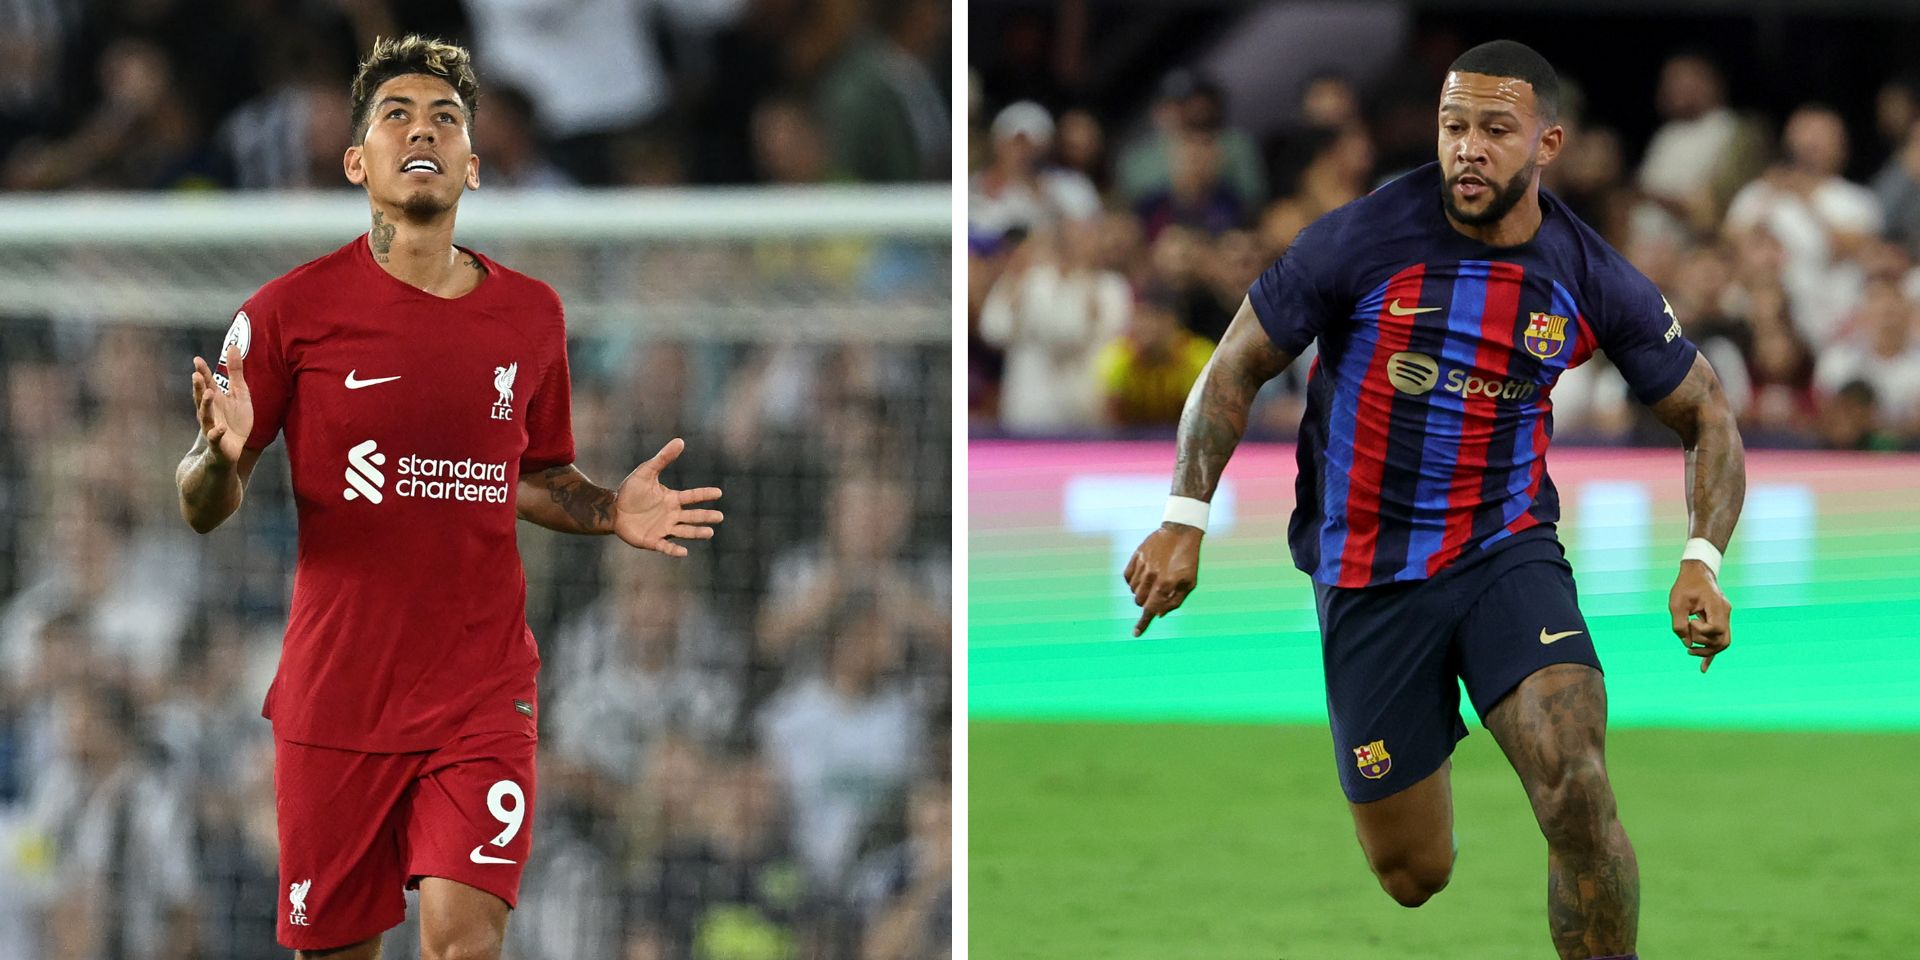 ‘In England they say…’ – Liverpool & Barcelona may complete January ‘trade that could end up favouring both’ clubs – report